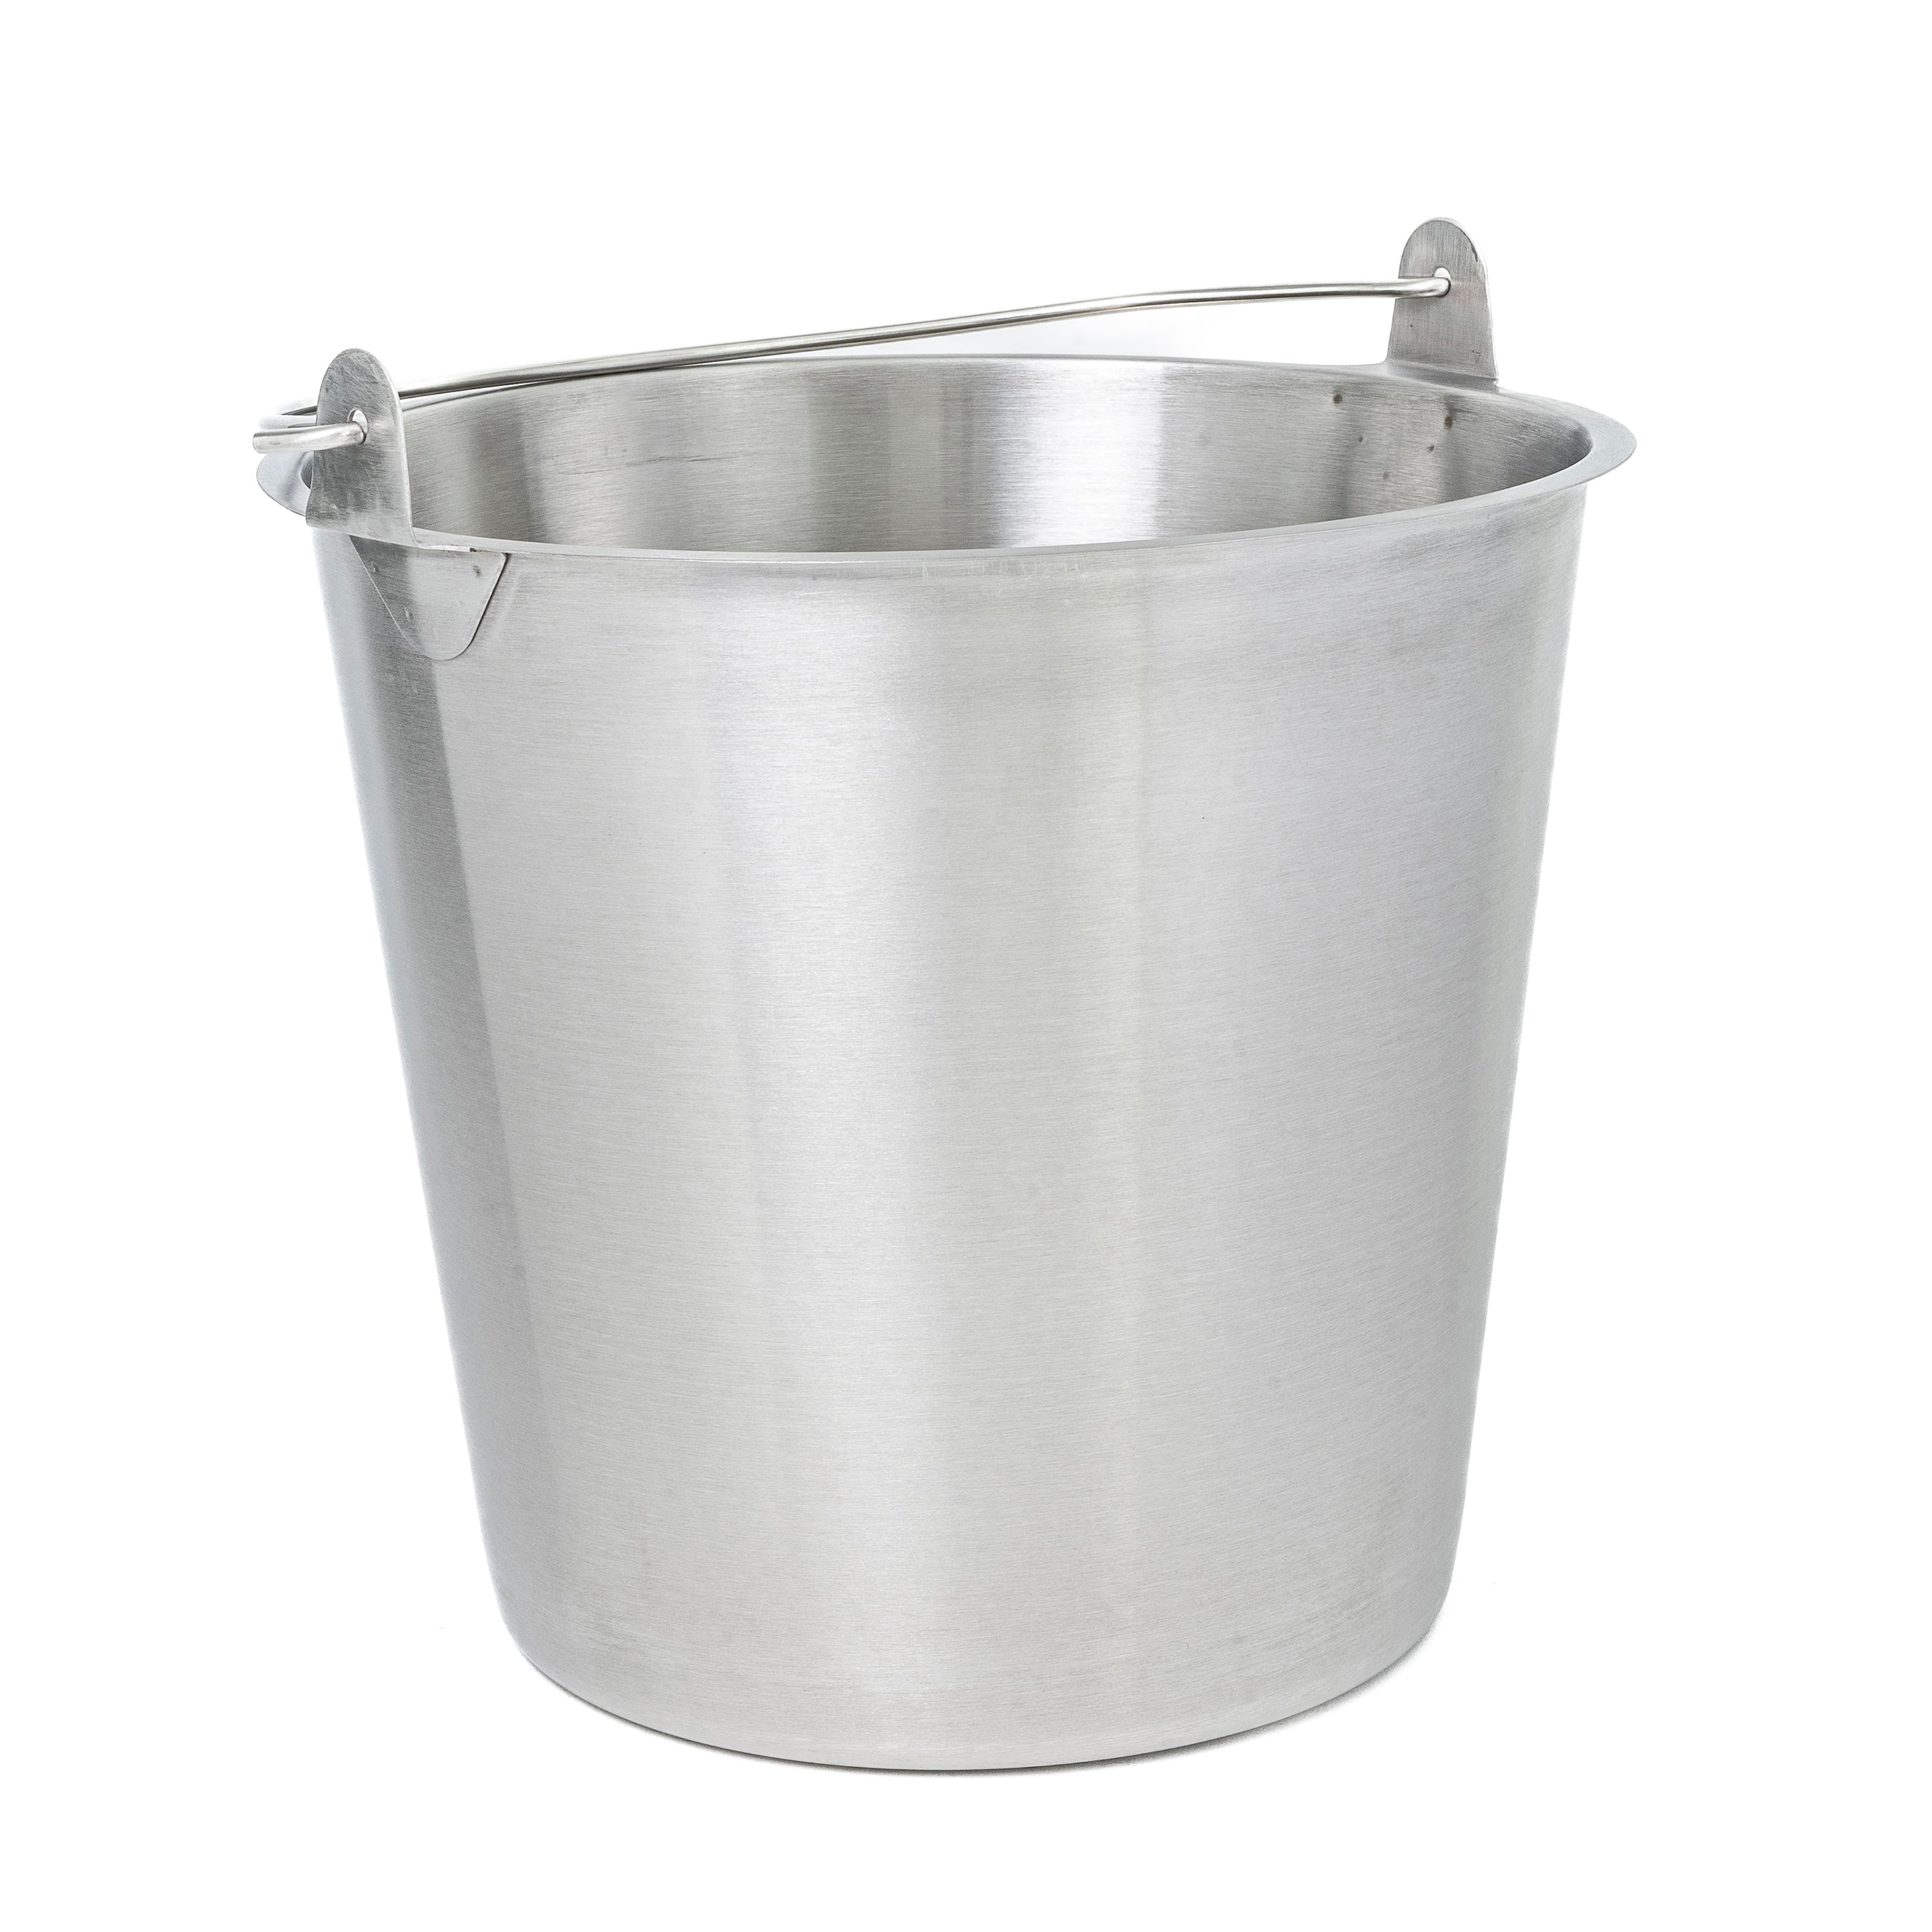 Adcraft PS-16 Serving Pail